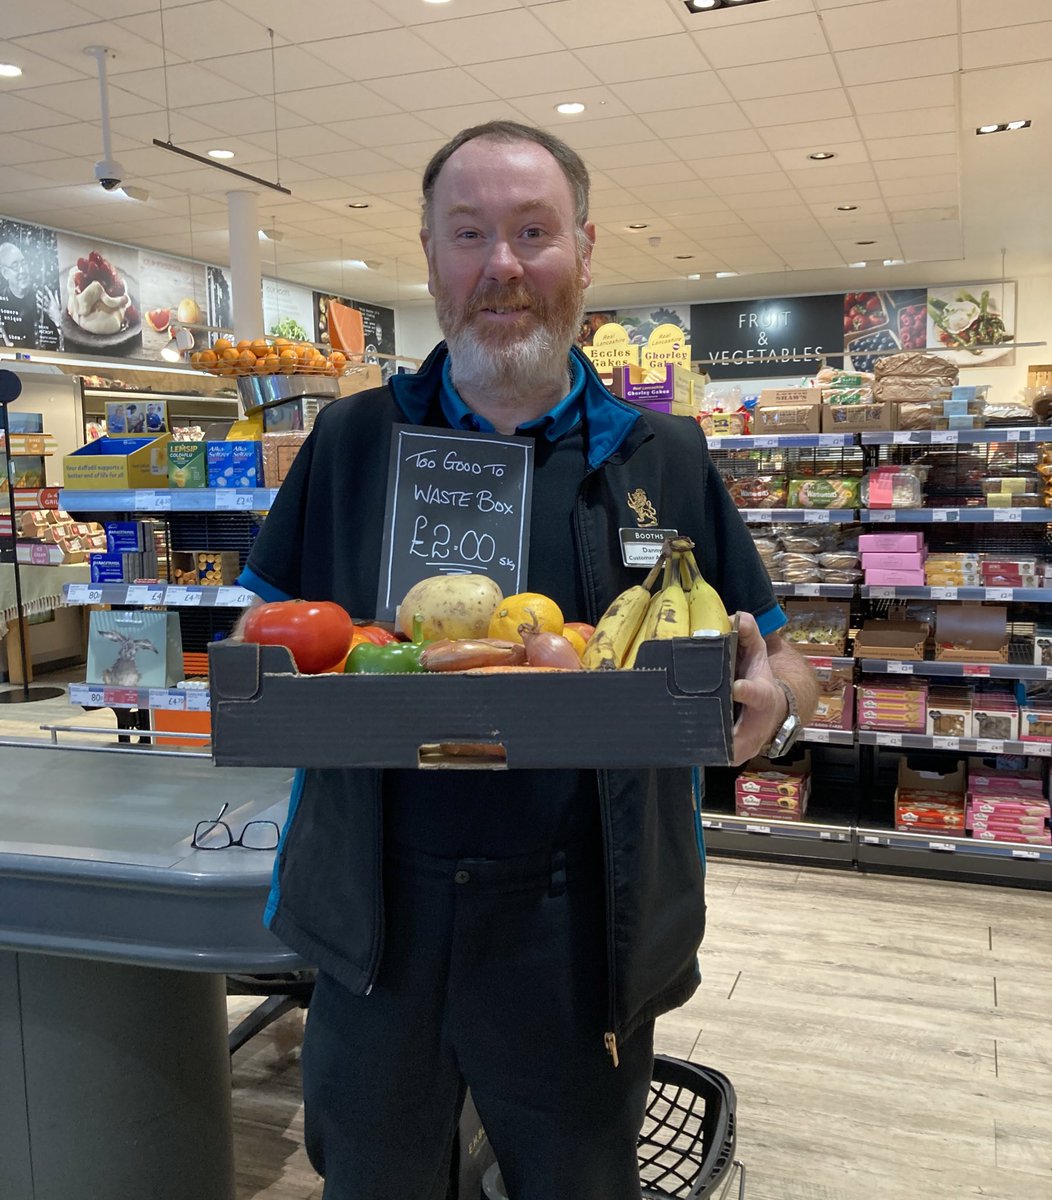 Daniel has Too Good To Waste fruit and veg boxes at Barrowford 🍌🍅